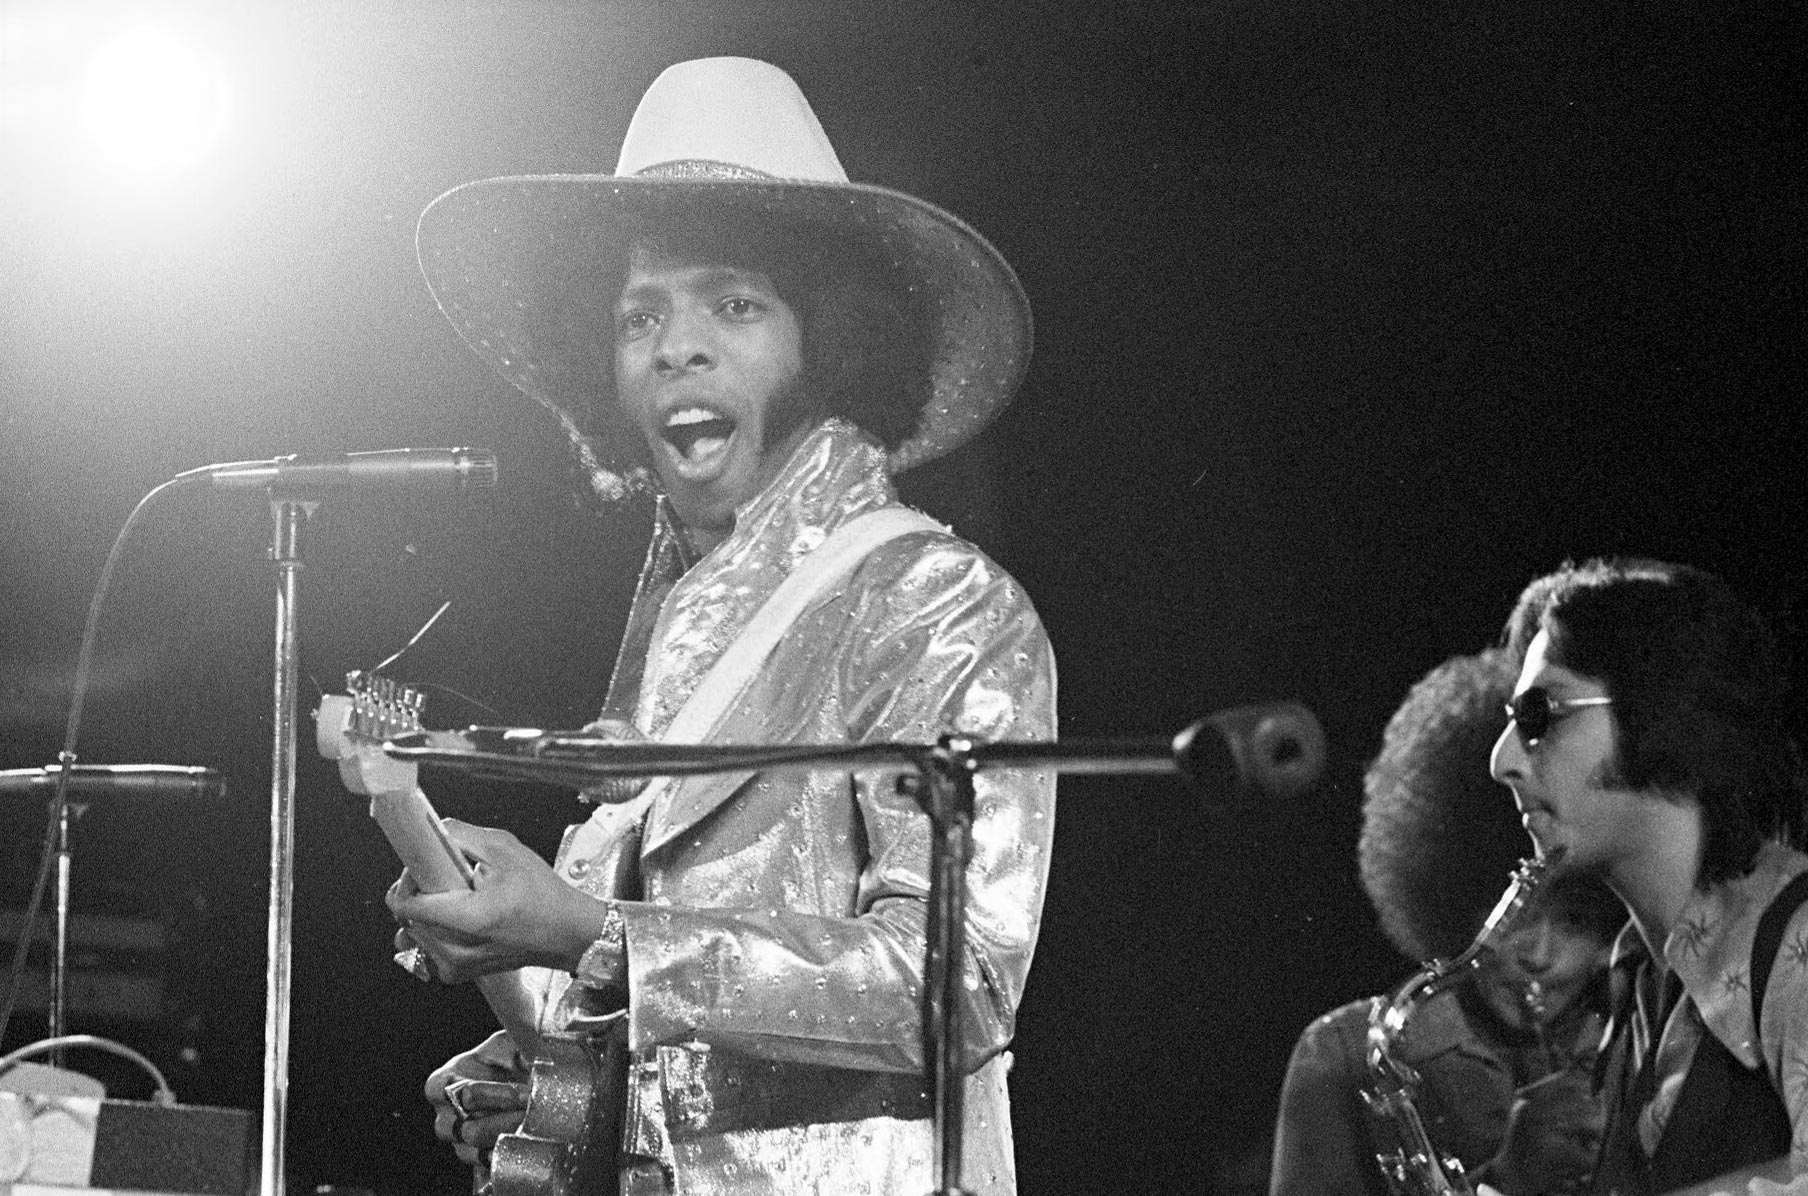 Black and white image: Sly and the Family Stone performing on stage